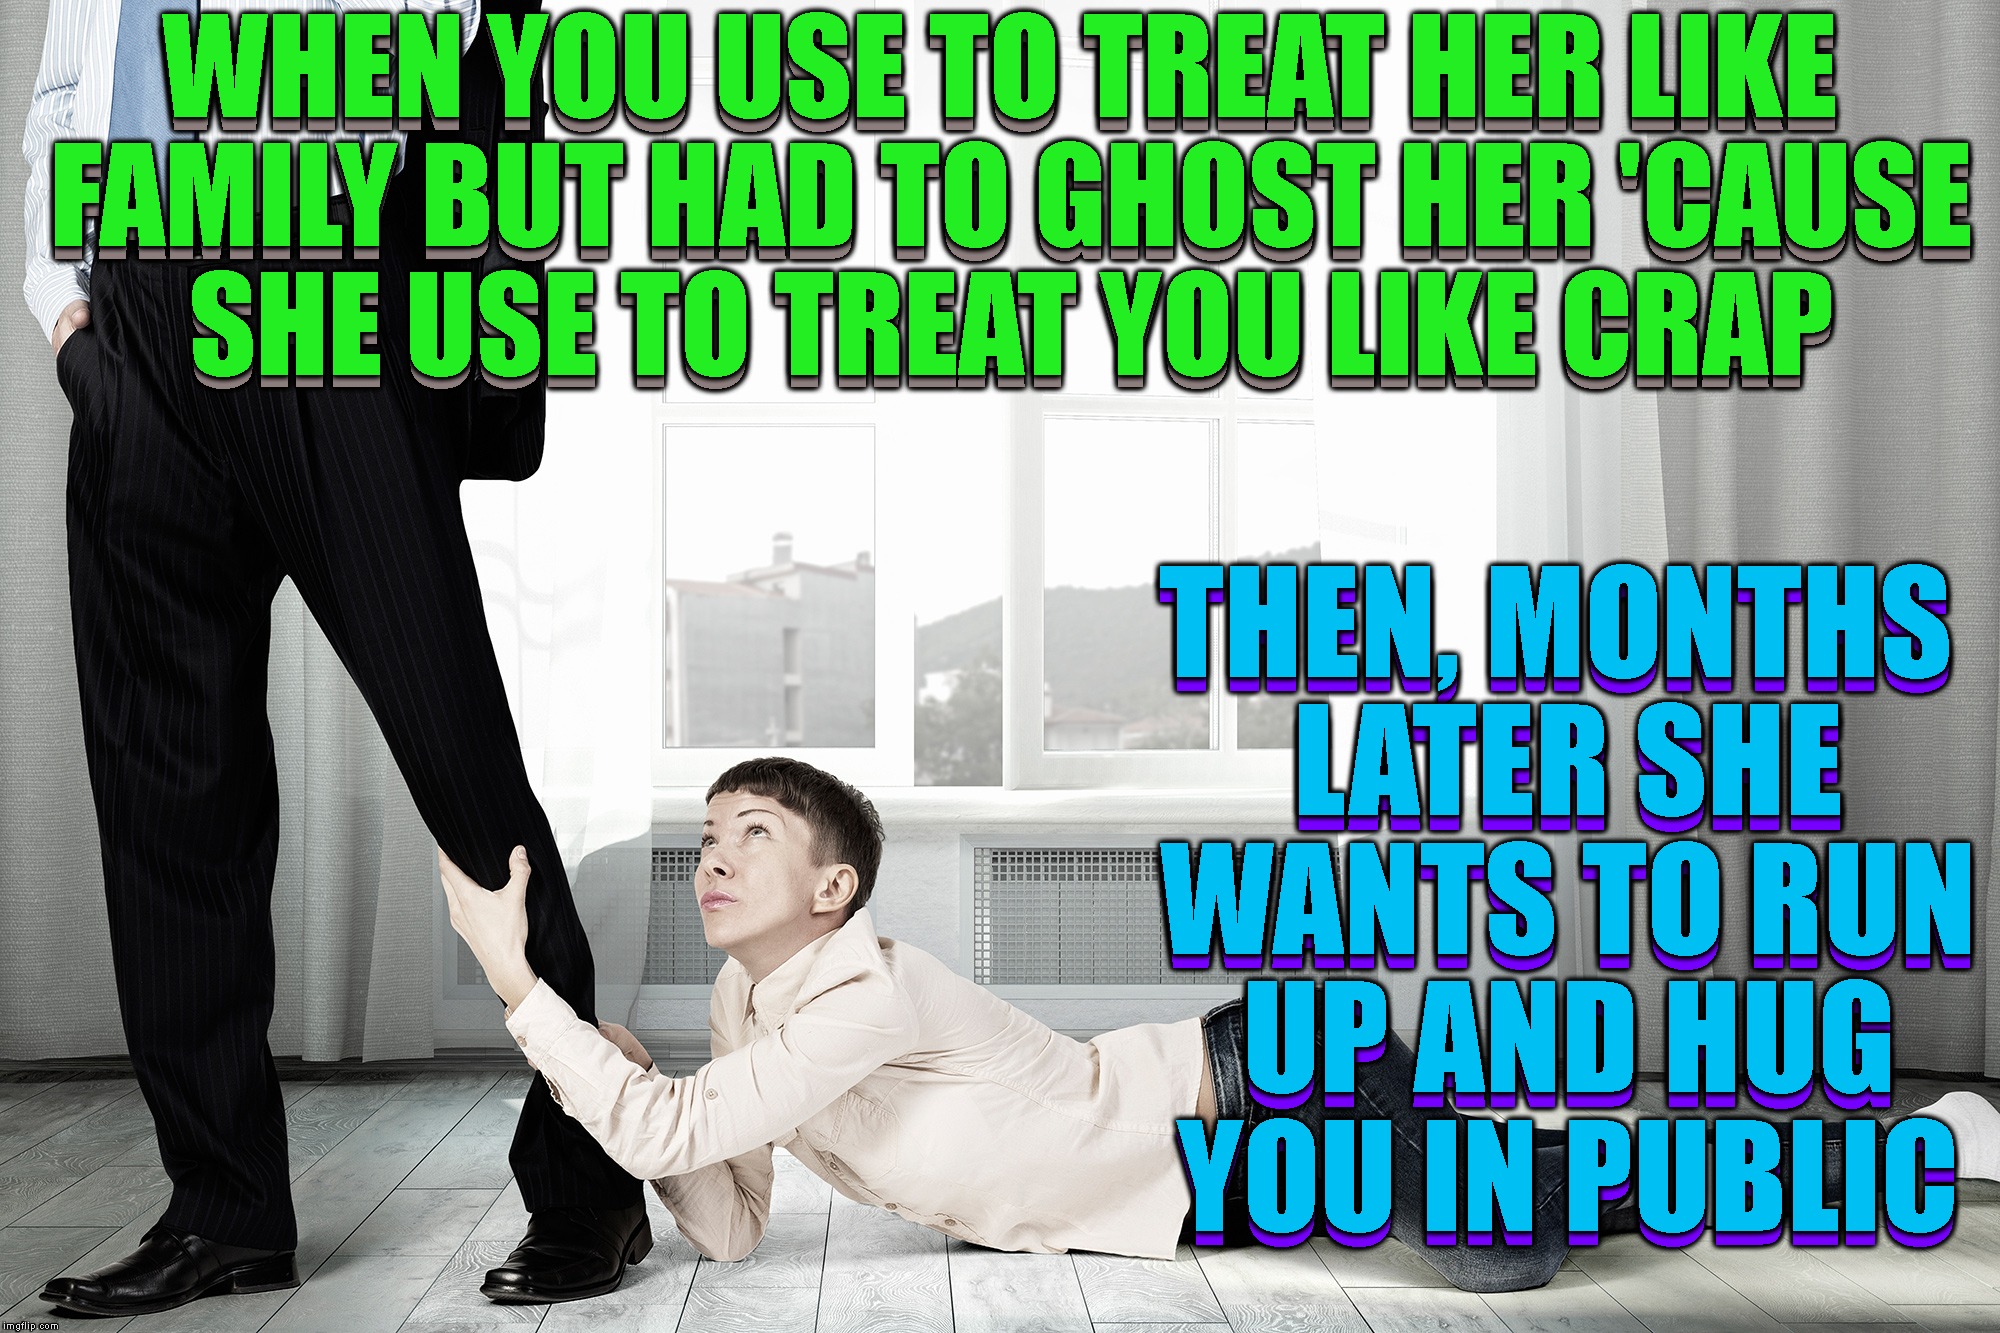 So, This Just Happened To Me At The Store Last Night | WHEN YOU USE TO TREAT HER LIKE FAMILY BUT HAD TO GHOST HER 'CAUSE SHE USE TO TREAT YOU LIKE CRAP; WHEN YOU USE TO TREAT HER LIKE FAMILY BUT HAD TO GHOST HER 'CAUSE SHE USE TO TREAT YOU LIKE CRAP; THEN, MONTHS LATER SHE WANTS TO RUN UP AND HUG YOU IN PUBLIC; THEN, MONTHS LATER SHE WANTS TO RUN UP AND HUG YOU IN PUBLIC | image tagged in ghosting,relationships,friendship,people,true story,leave me alone | made w/ Imgflip meme maker